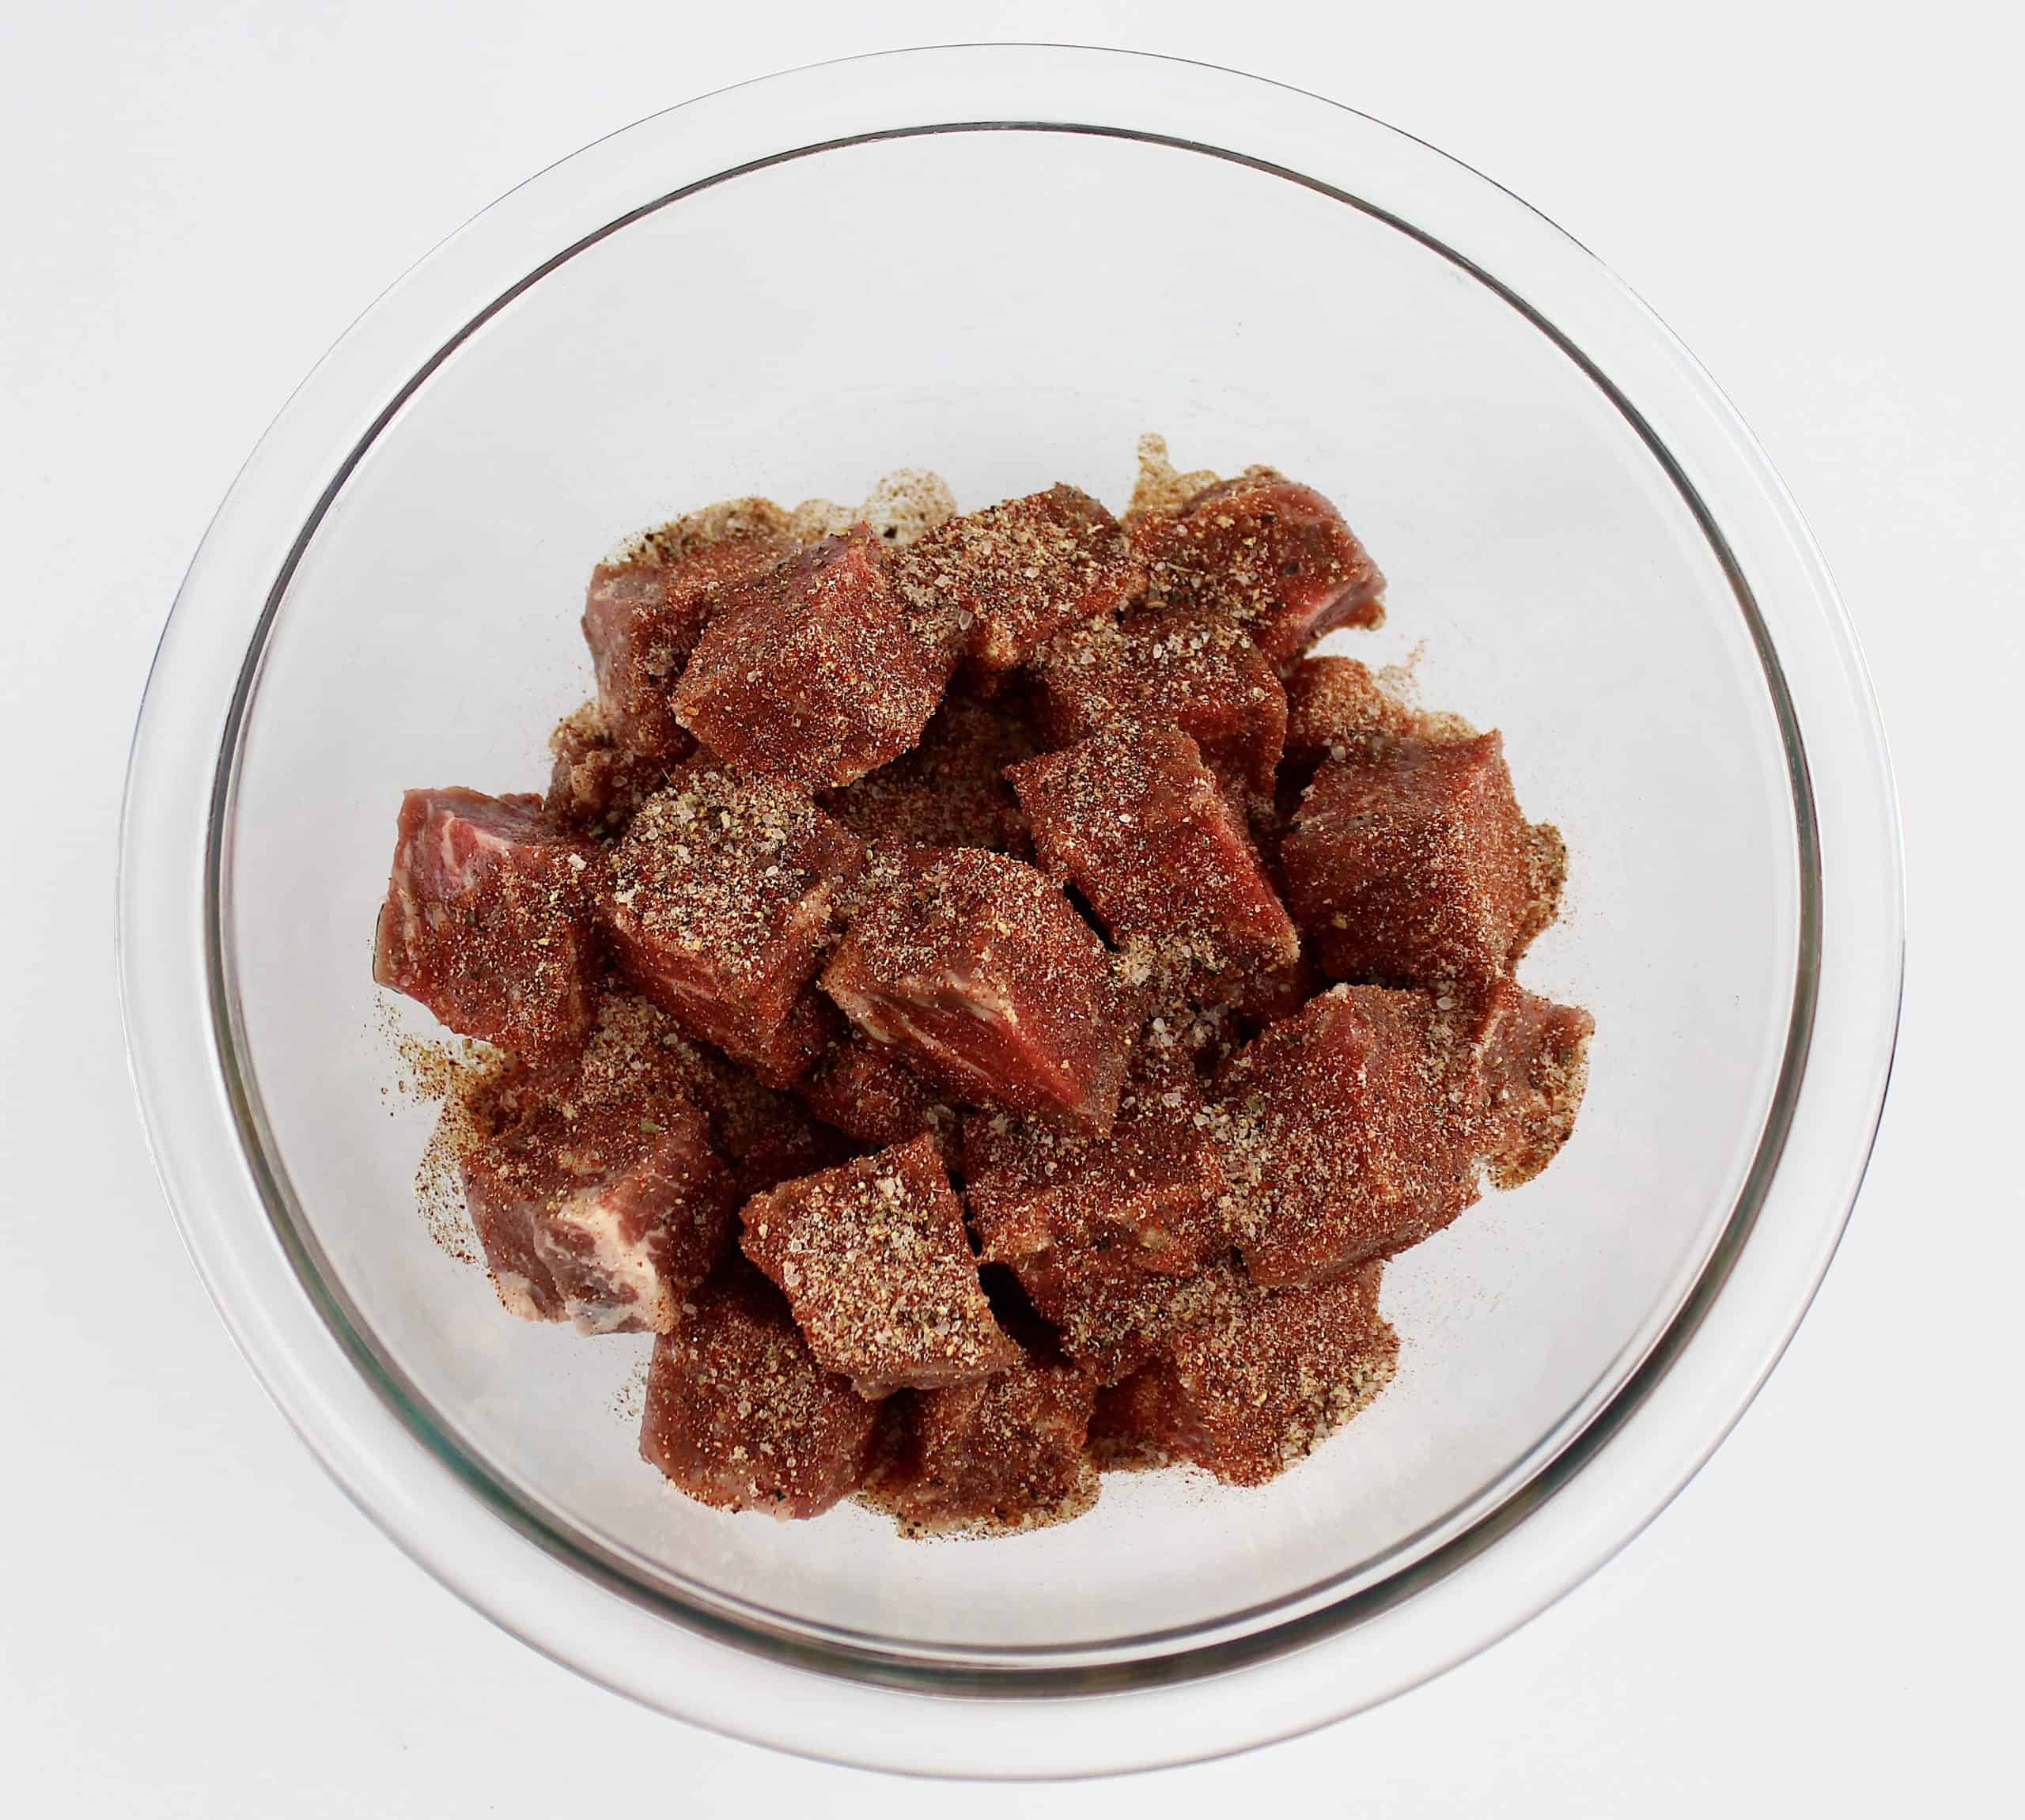 steak bites in glass bowl with spice mix on top